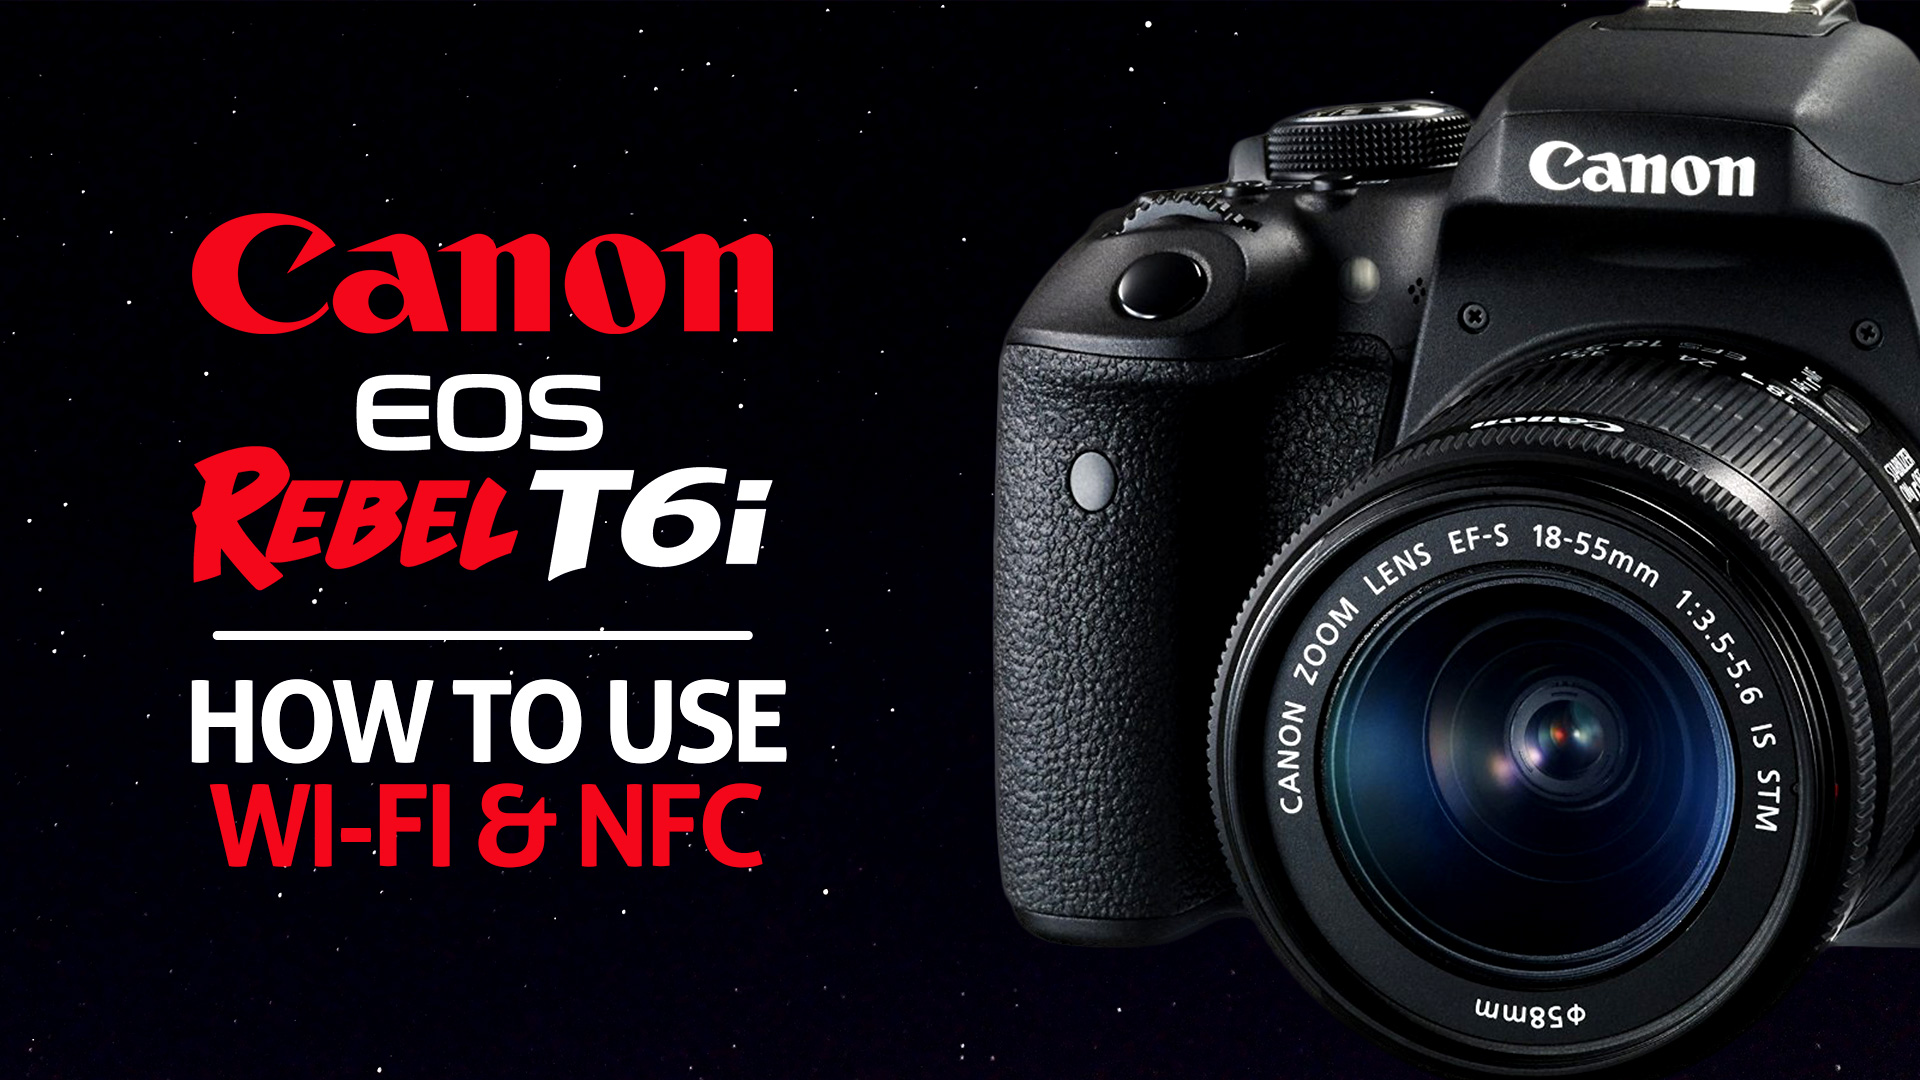 How to use Wifi & NFC on Canon t6i